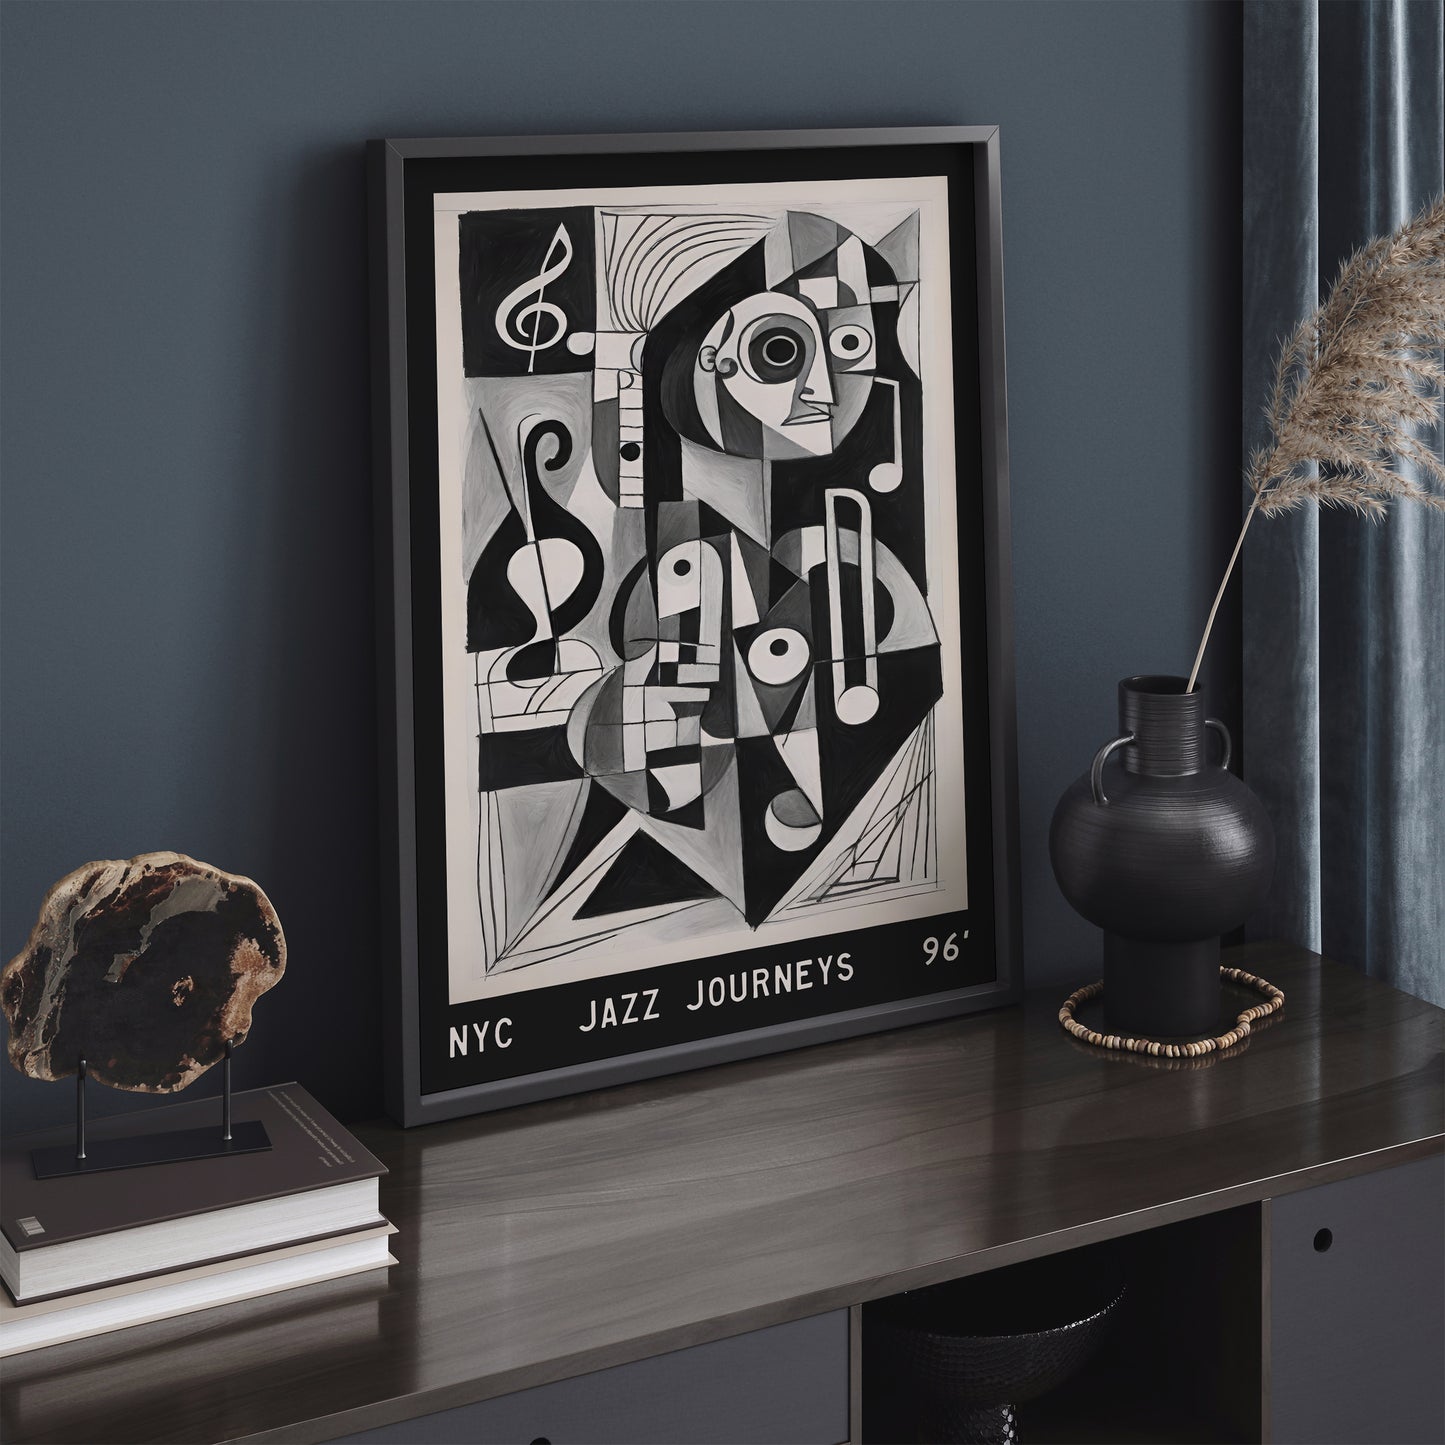 Jazz Journeys NYC Picasso Cubism Style Poster